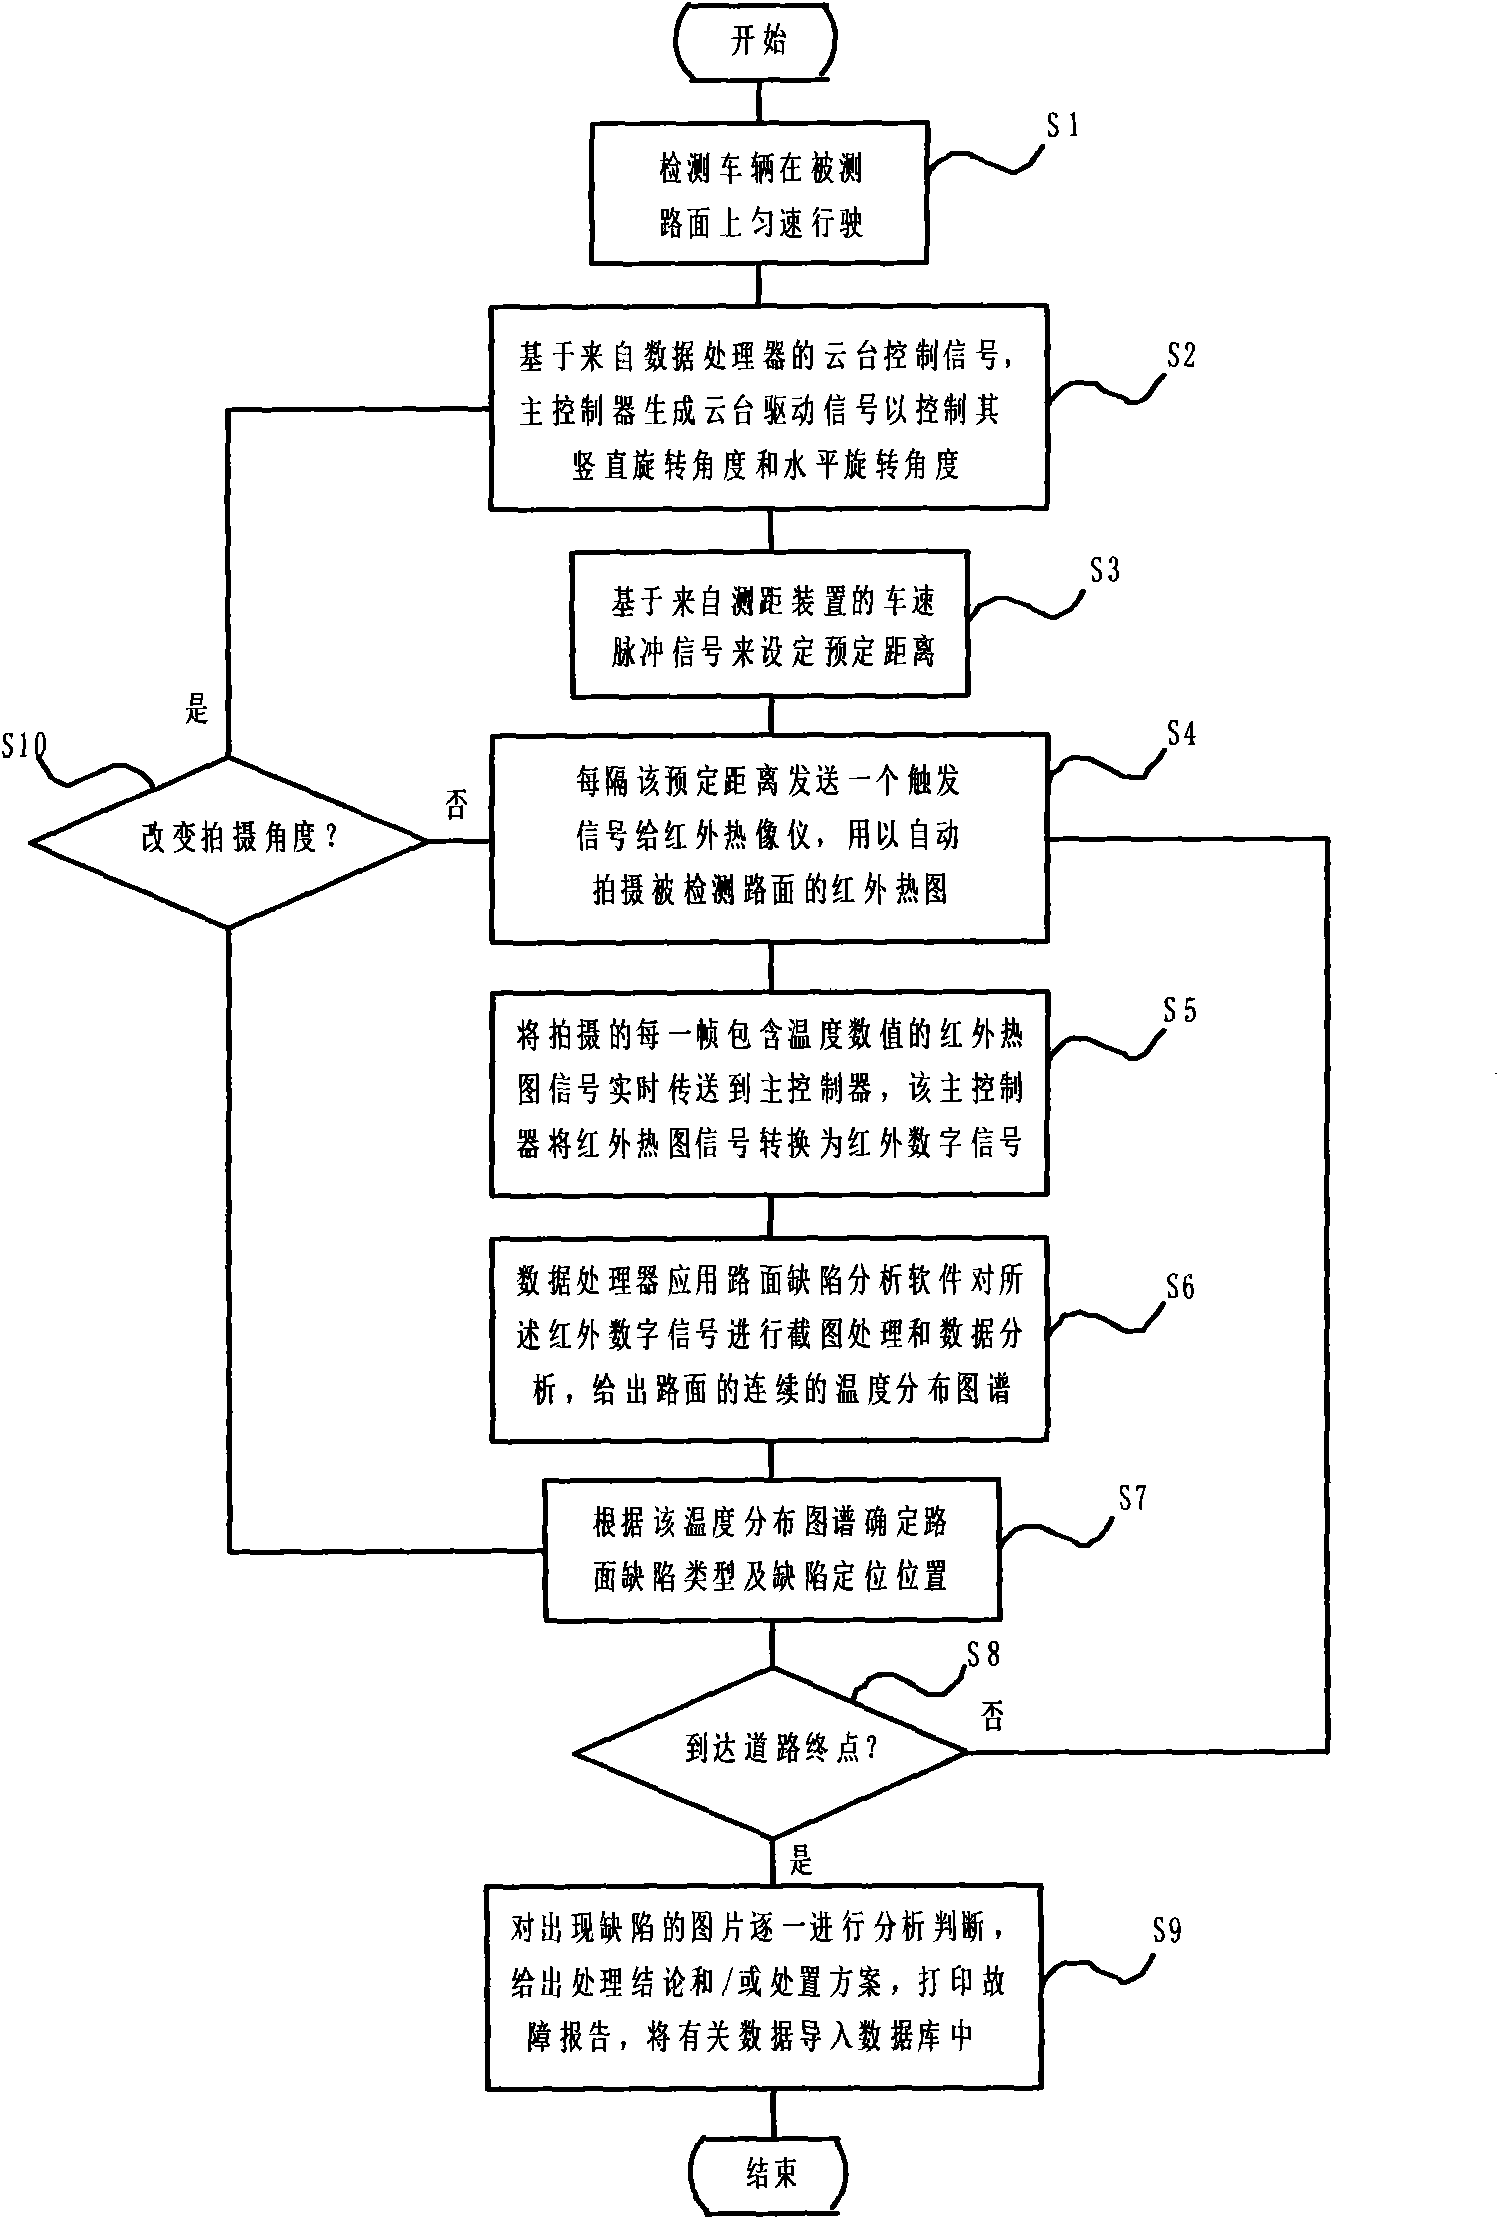 Pavement defect detection system and method